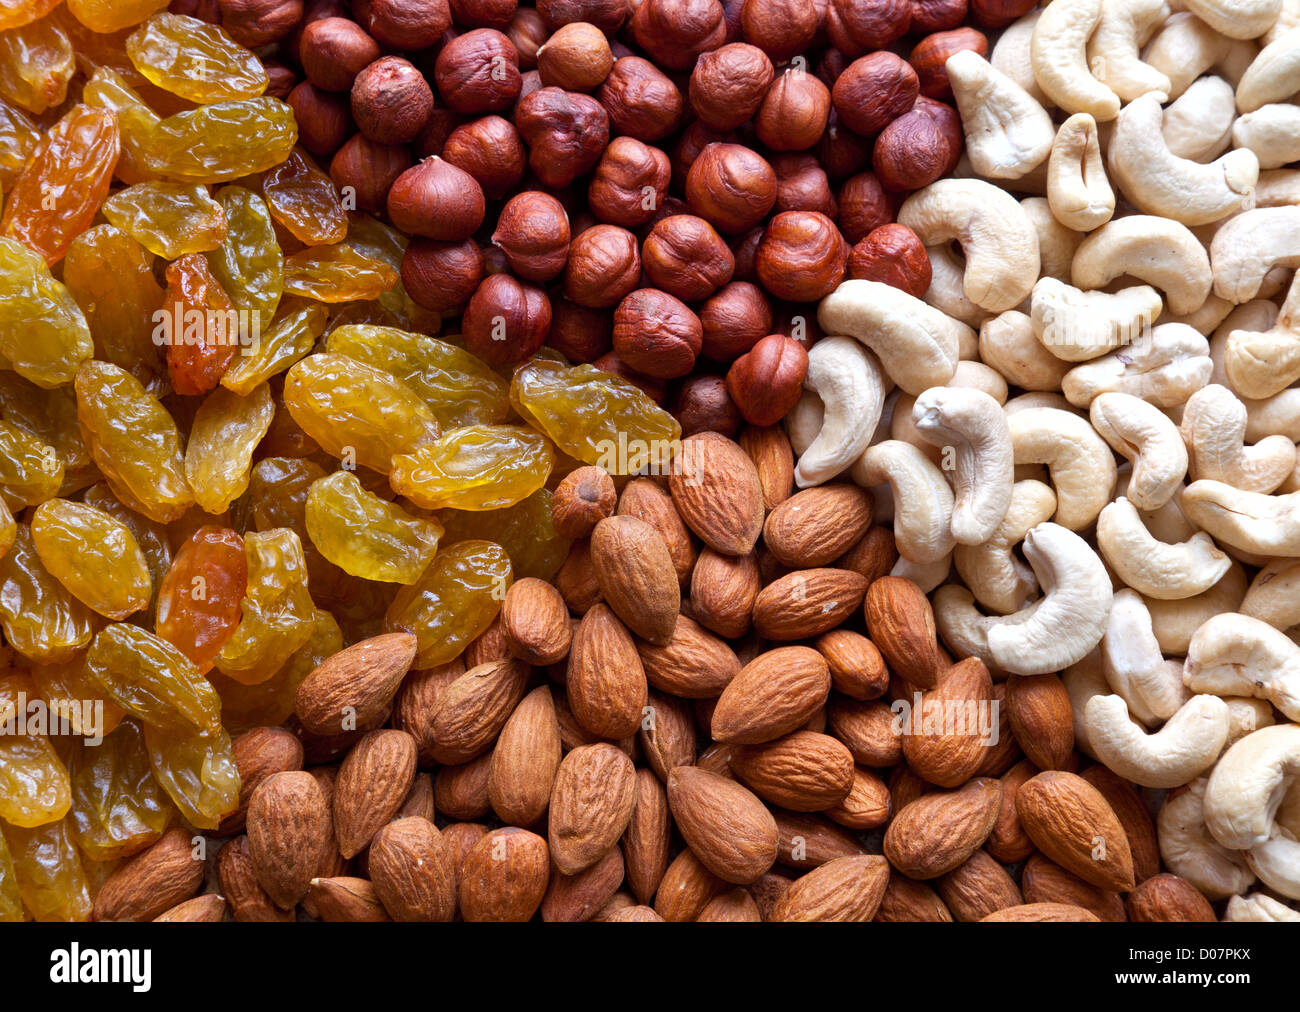 Four section of different nuts and raisins Stock Photo